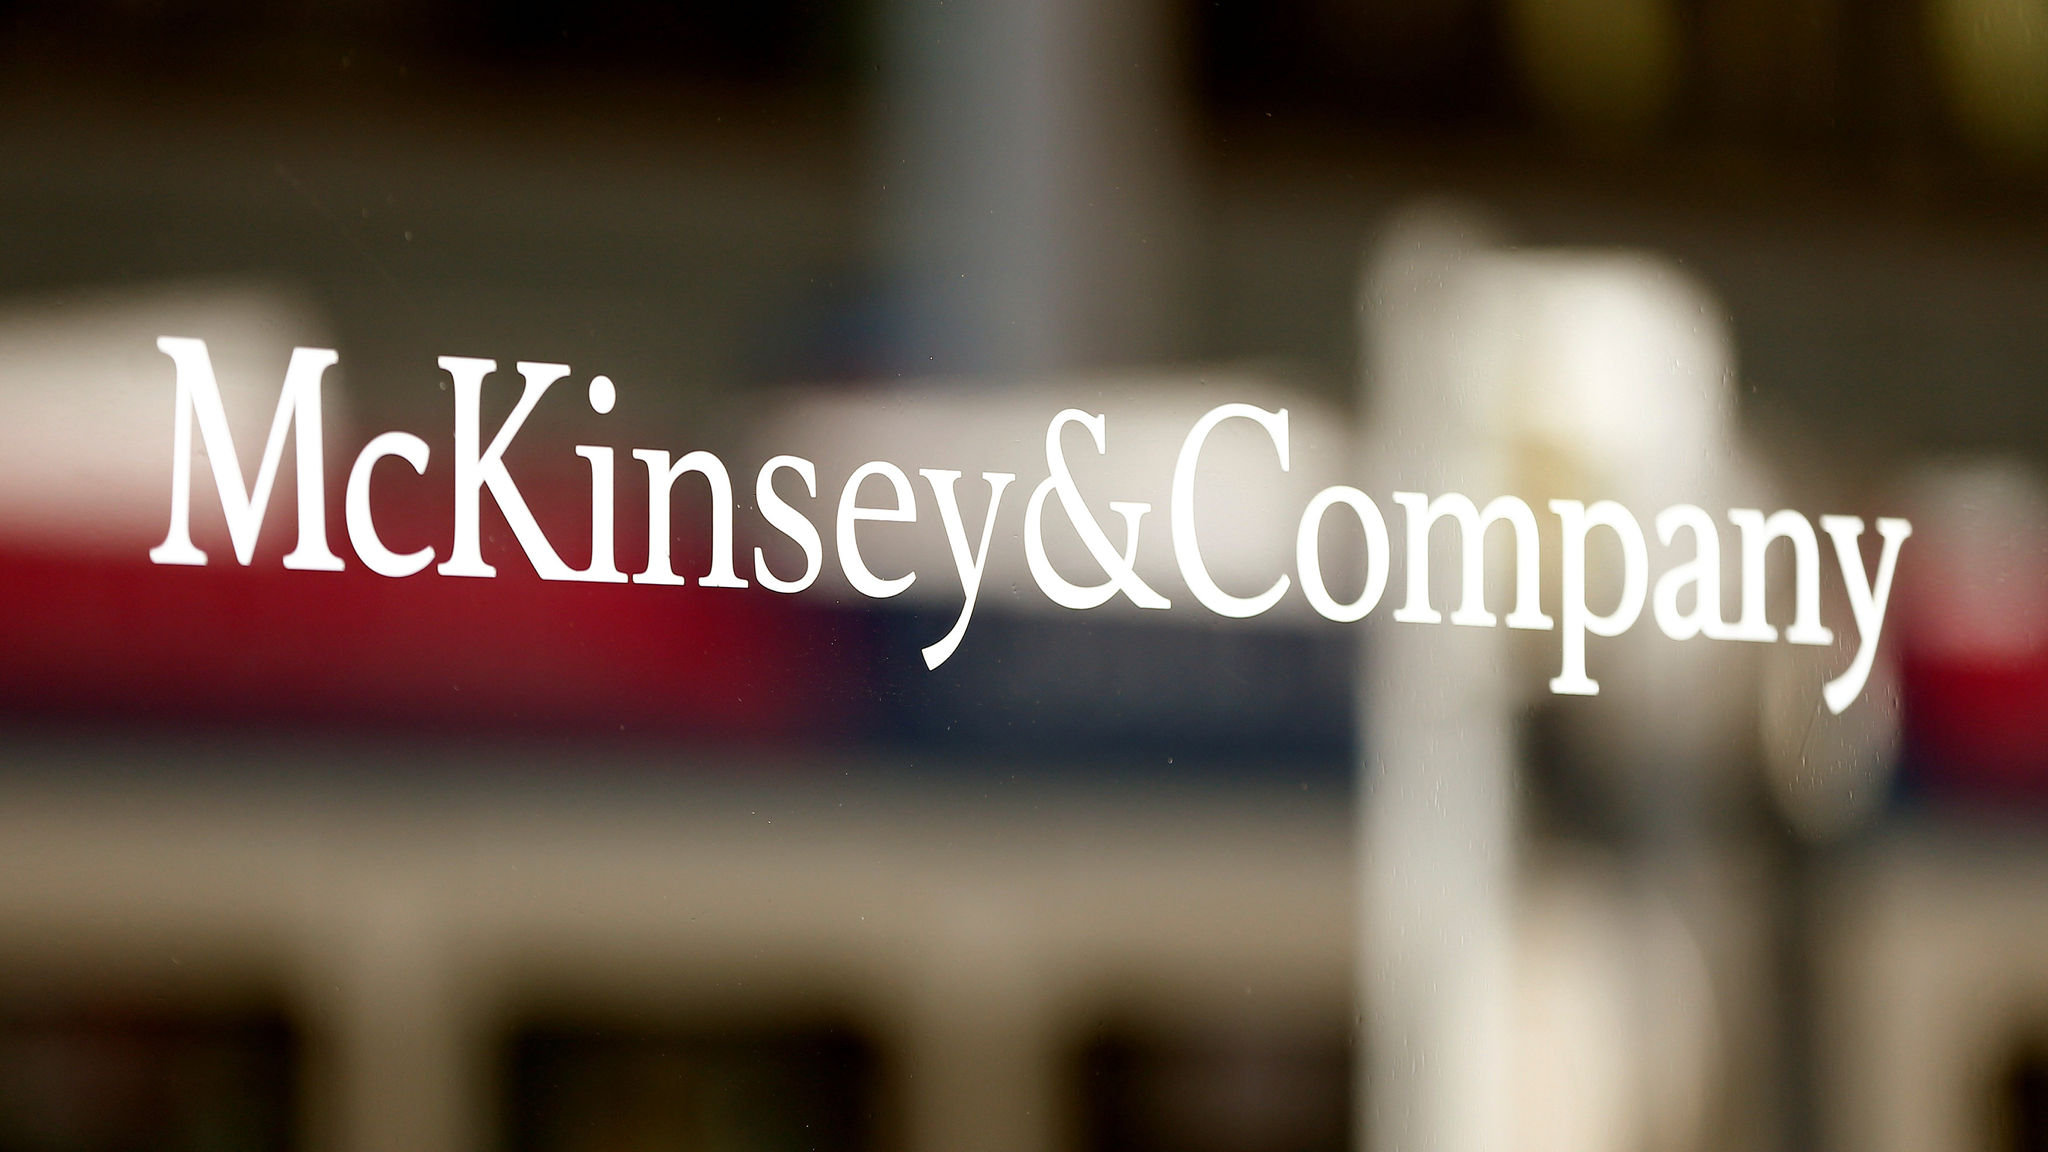 Mckinsey Faces An Uphill Struggle Over The Value Of Advice